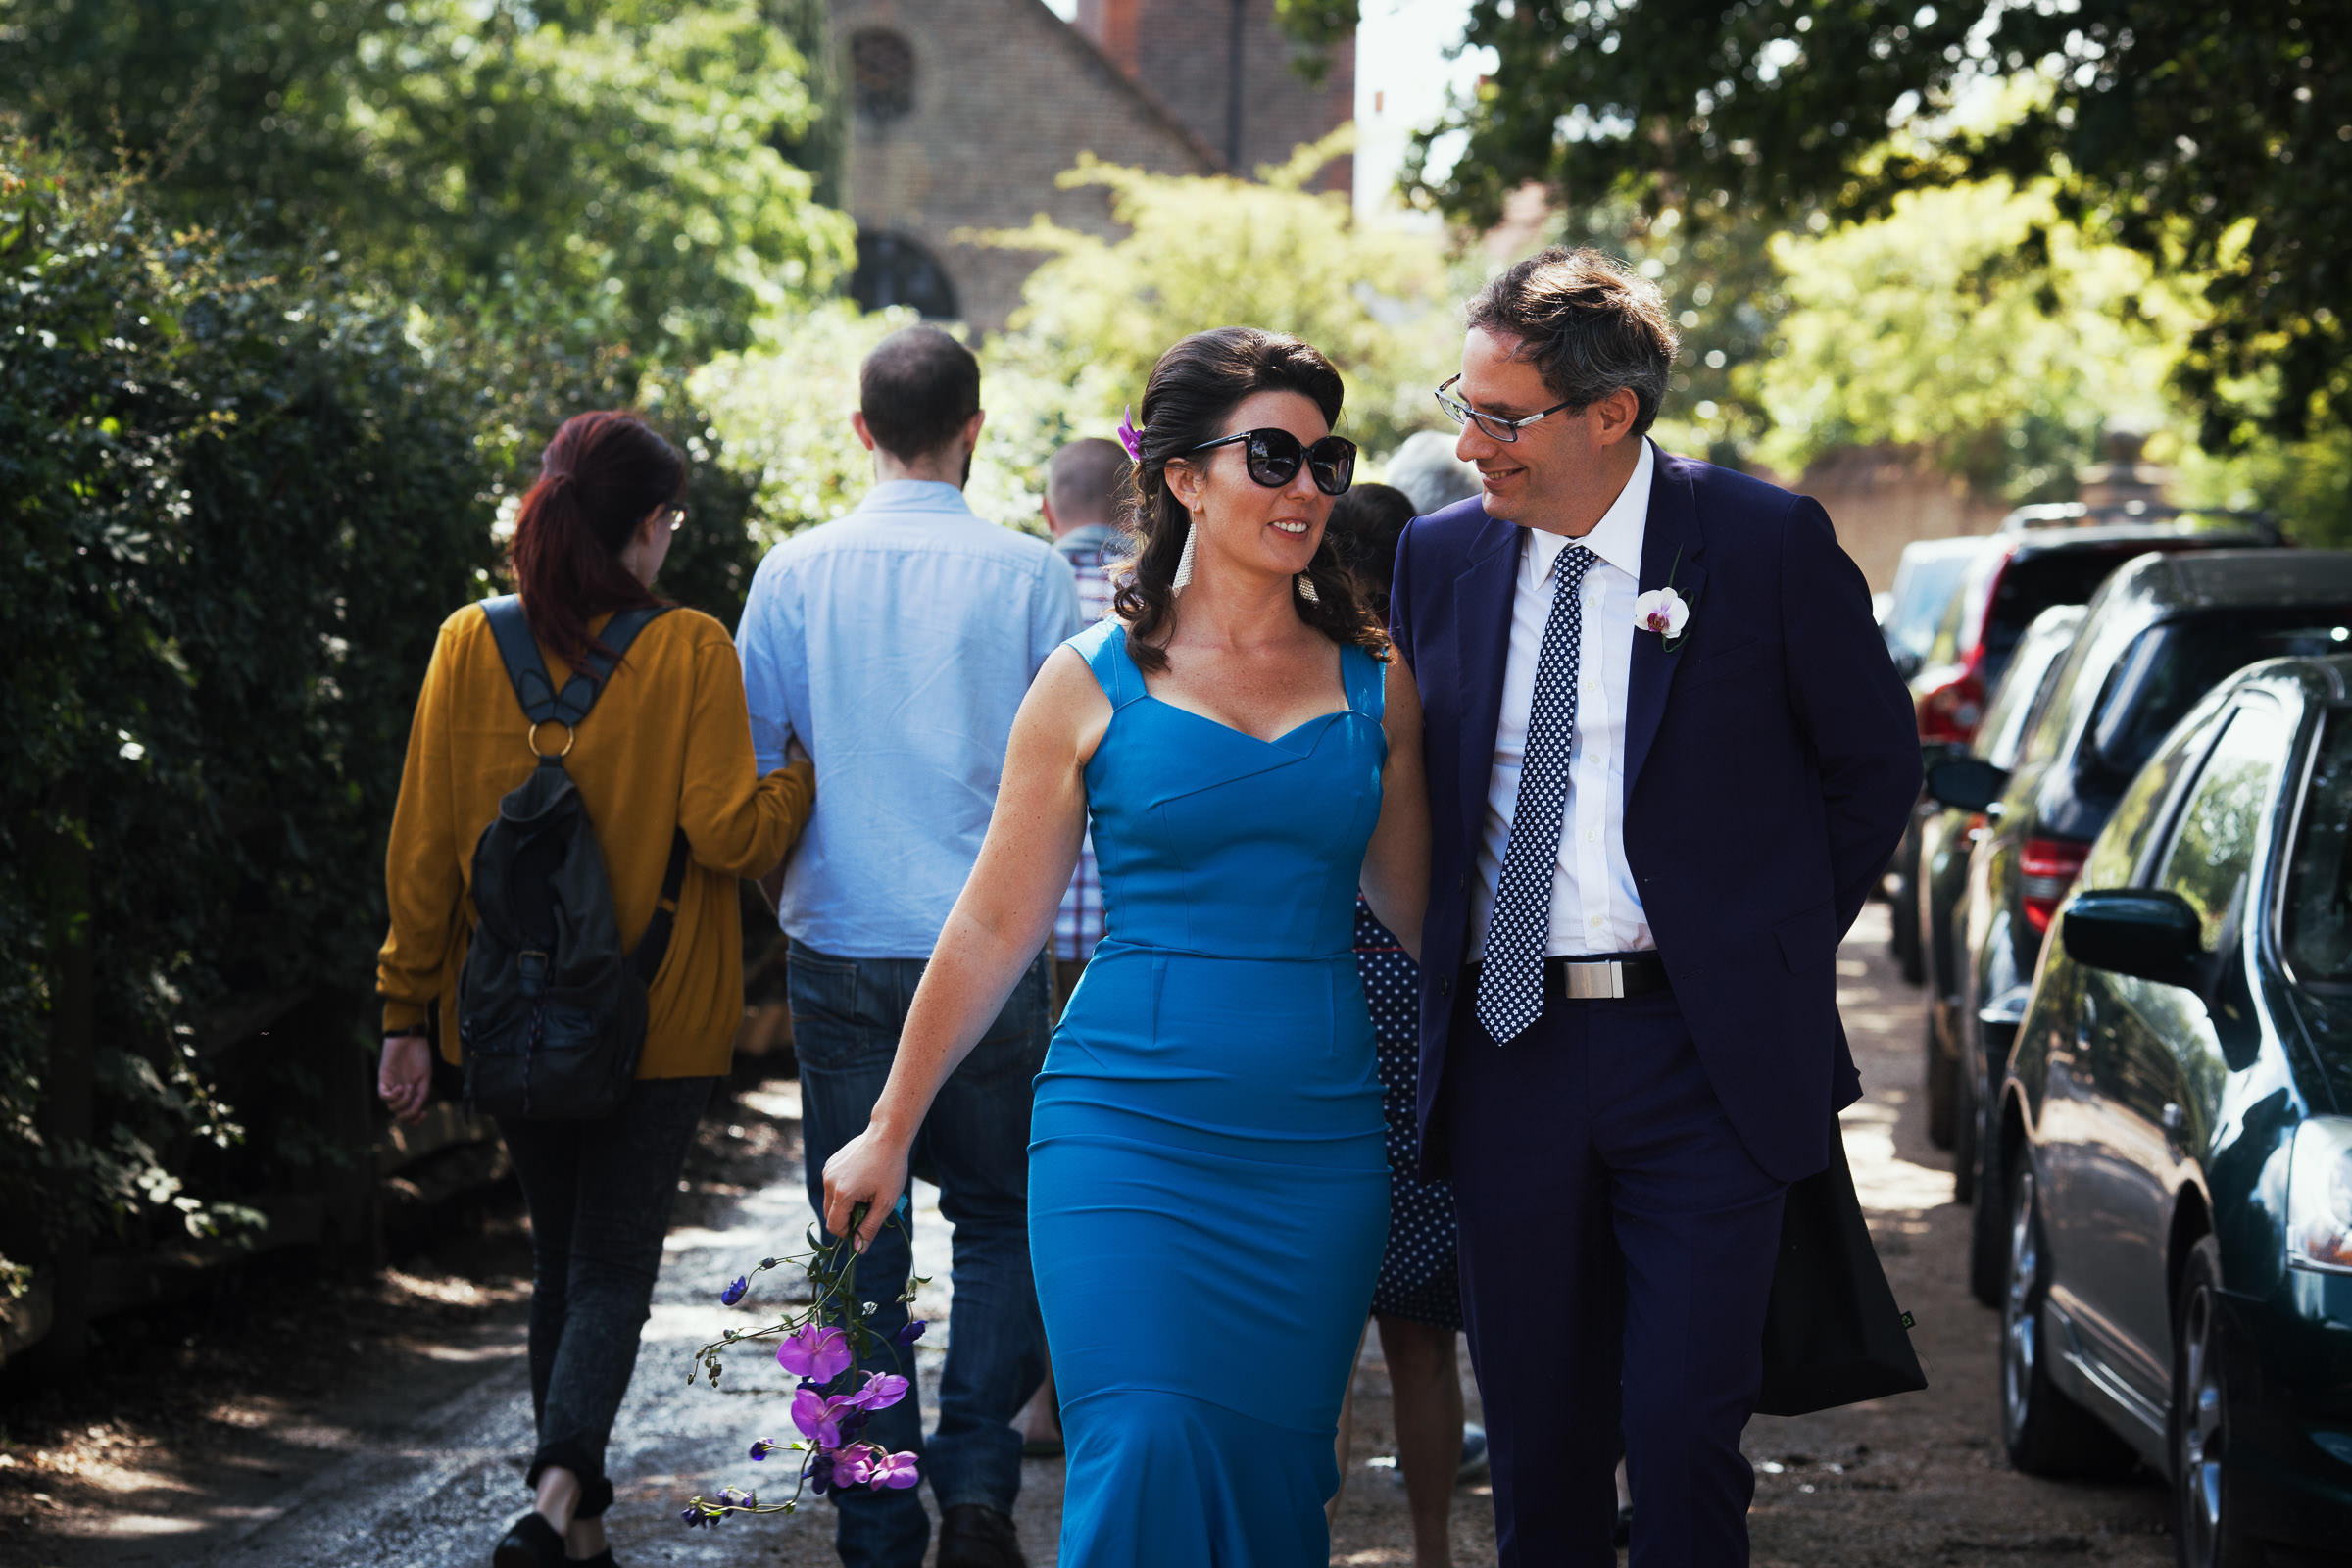 Bride and groom walking off Church Lane to Petersham Nurseries. Cars parked on the right. The woman is wearing Roland Mouret Mermaid Dress in Blue and sunglasses. The groom is wearing a purple suit. It's a sunny day.